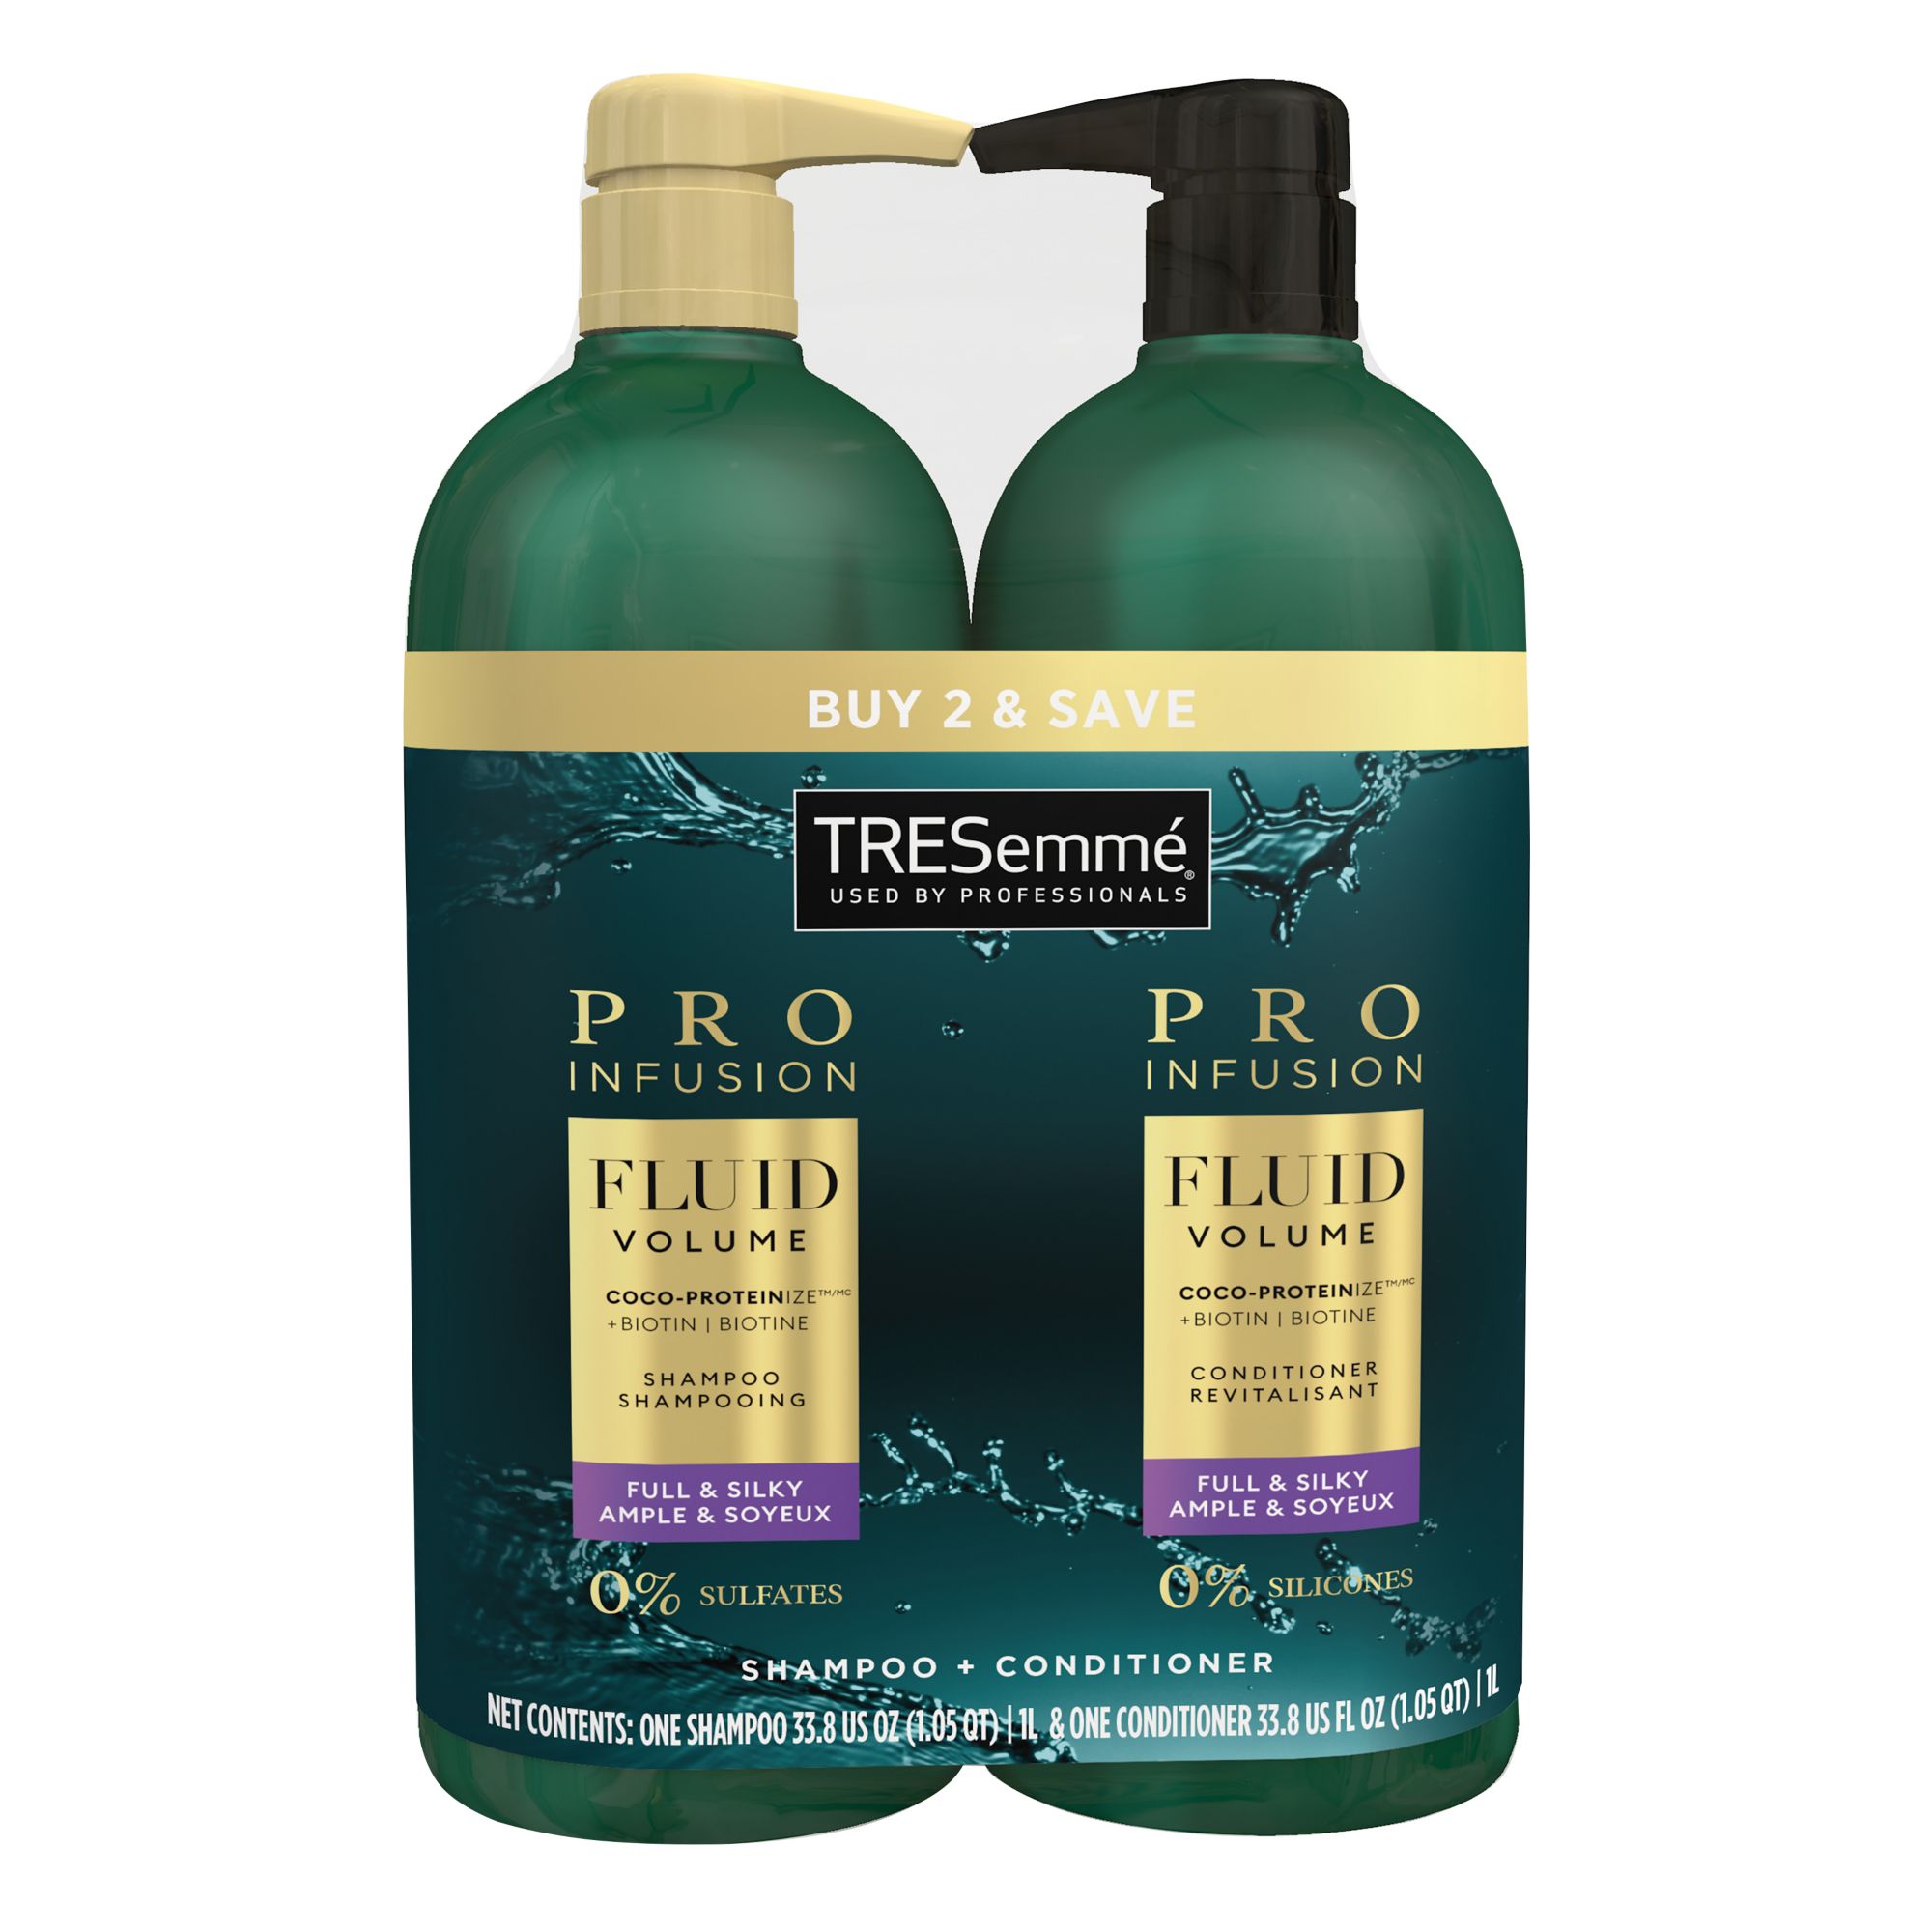 TRESemme Pro Infusion Fluid Volume Shampoo and Conditioner Pack